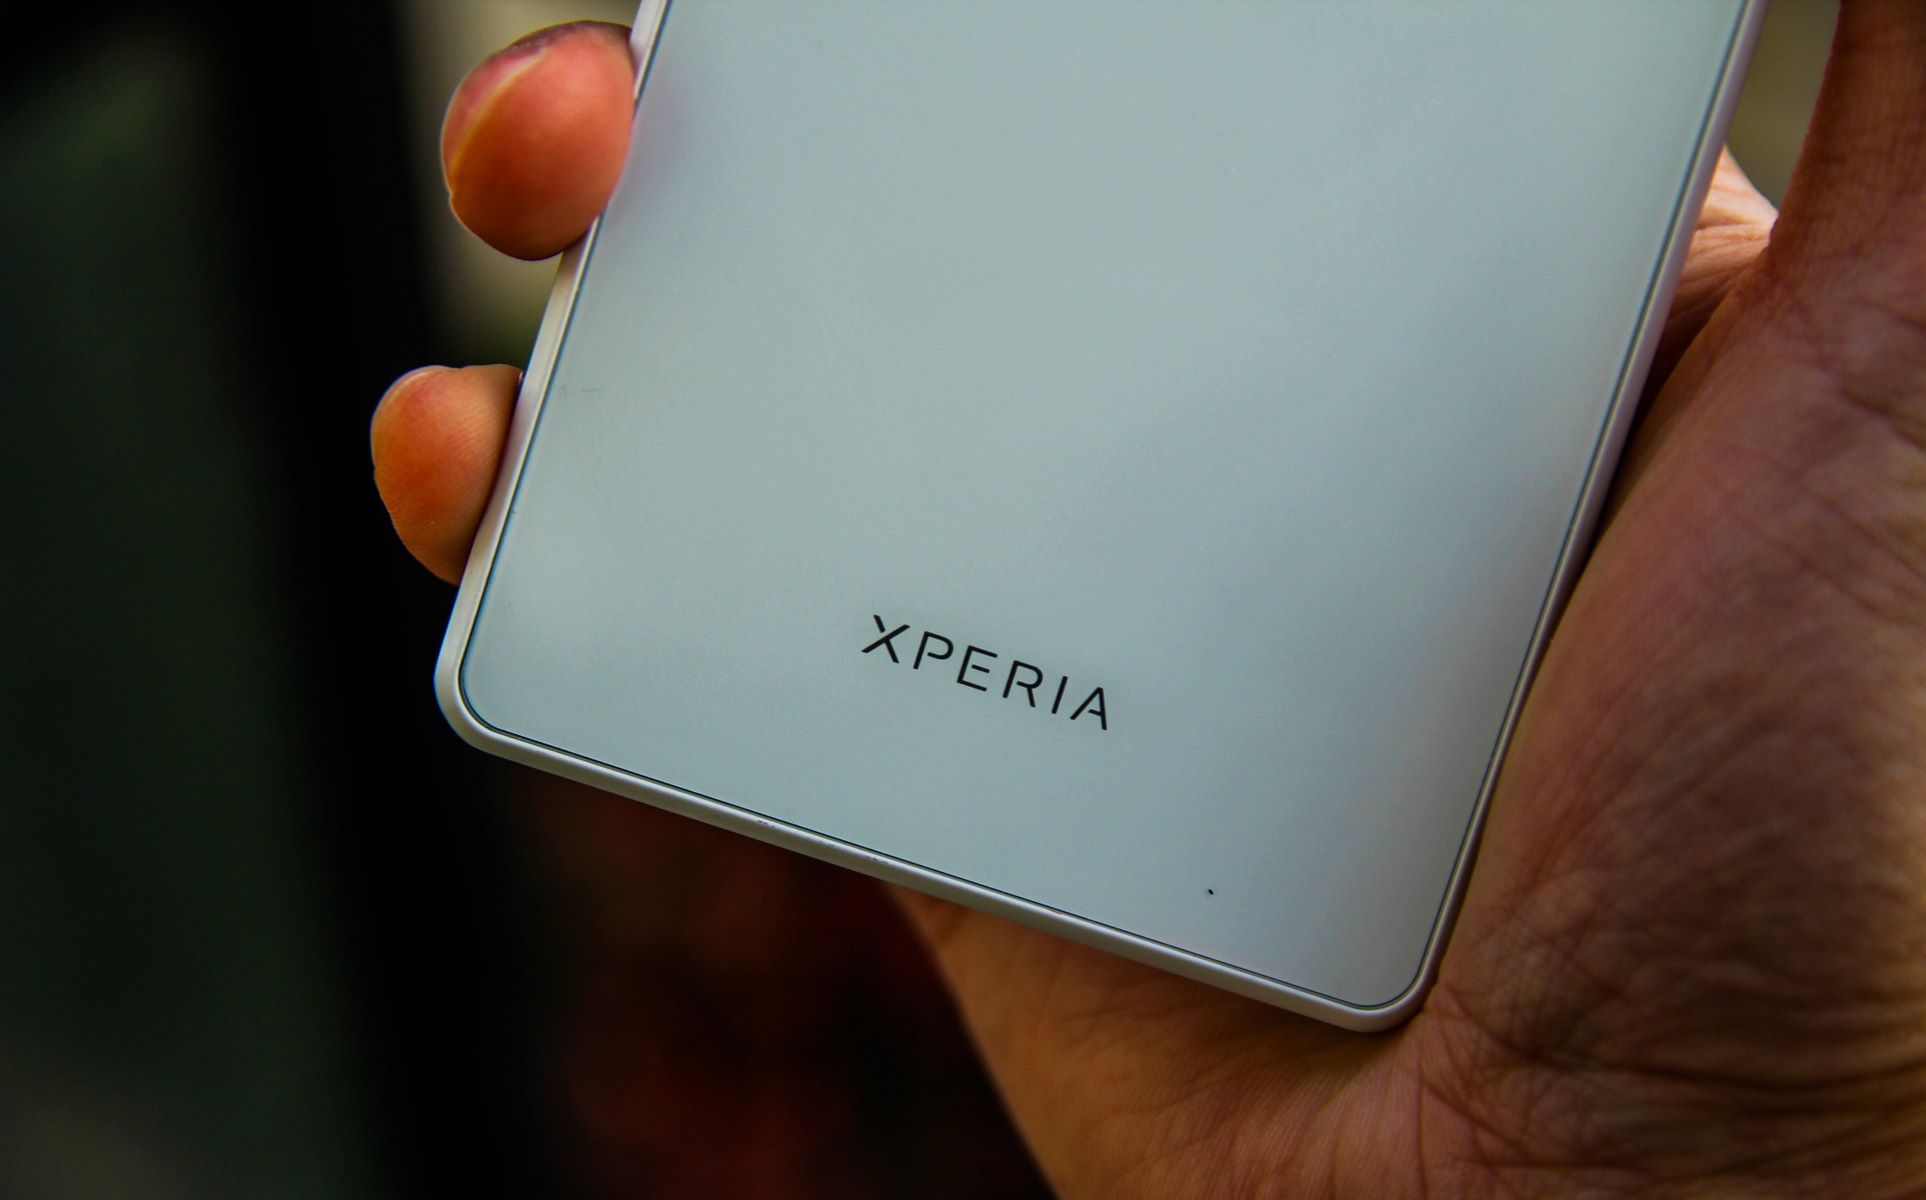 sony-xperia-c4-exploring-its-performance-and-features